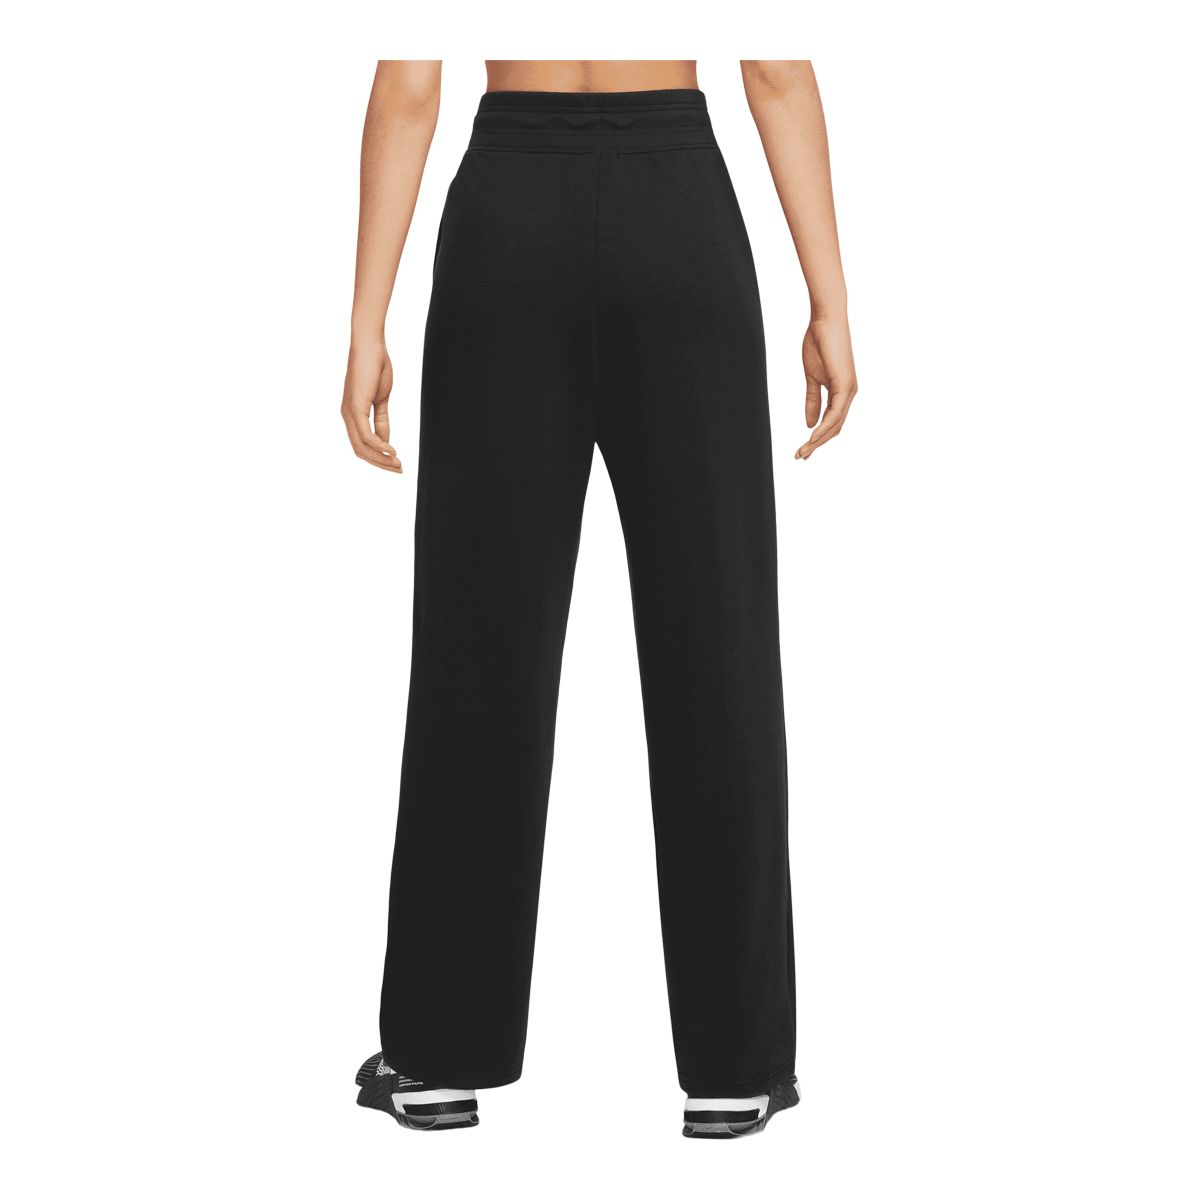 https://media-www.sportchek.ca/product/div-03-softgoods/dpt-70-athletic-clothing/sdpt-02-womens/334166899/nike-w-nk-one-df-oh-pant-e0317a98-0459-46c5-9aeb-0a96587a7e41-jpgrendition.jpg?imdensity=1&imwidth=1244&impolicy=mZoom